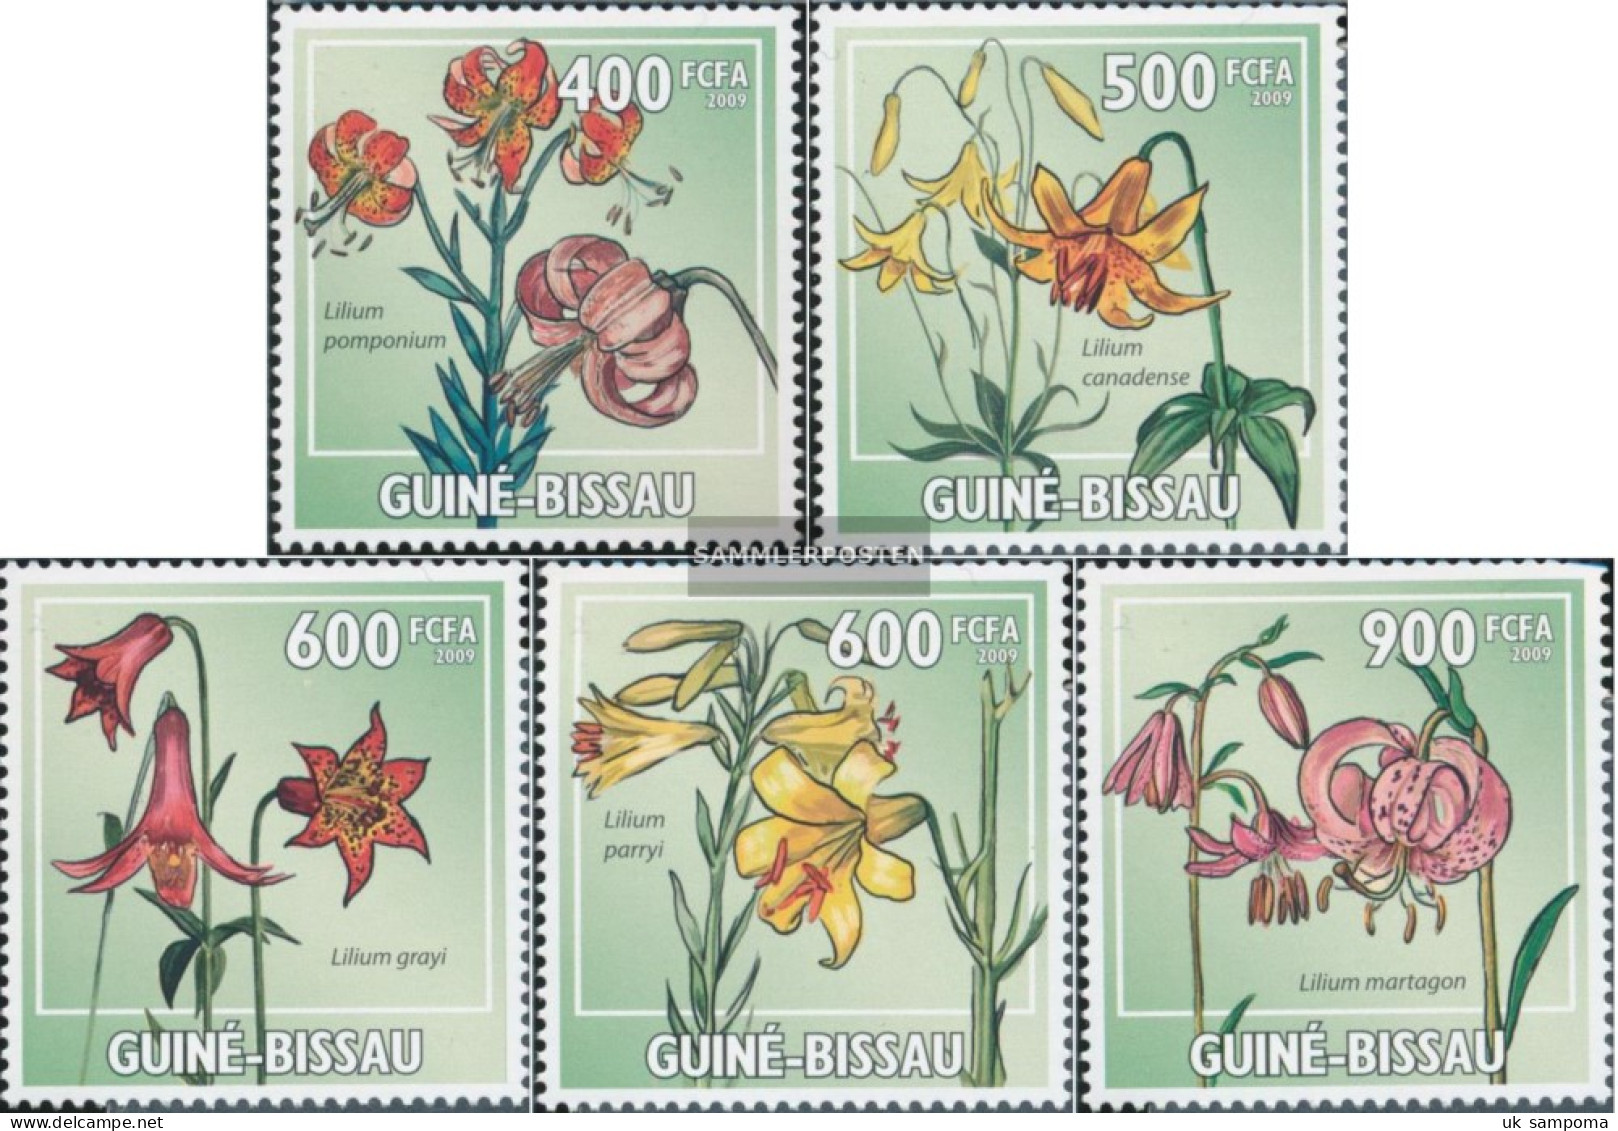 Guinea-Bissau 4450-4454 (complete. Issue) Unmounted Mint / Never Hinged 2009 Lilies - Guinea-Bissau